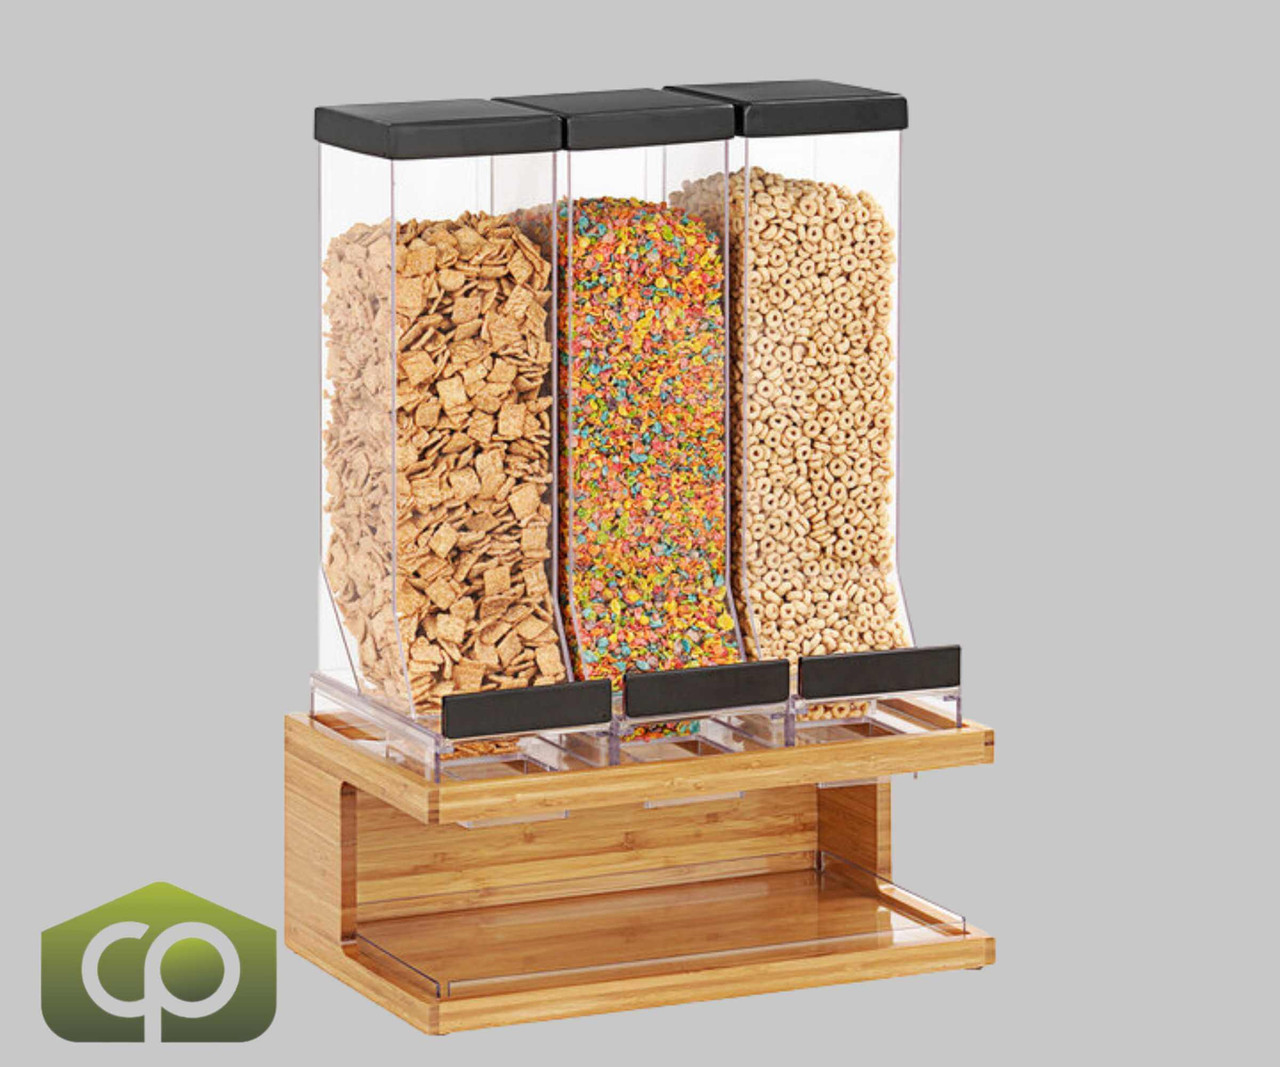 Cal-Mil Bamboo 17 1/4" x 9 1/2" x 23 1/2" Bamboo Wood Triple Canister Cereal Dispenser - Natural Elegance